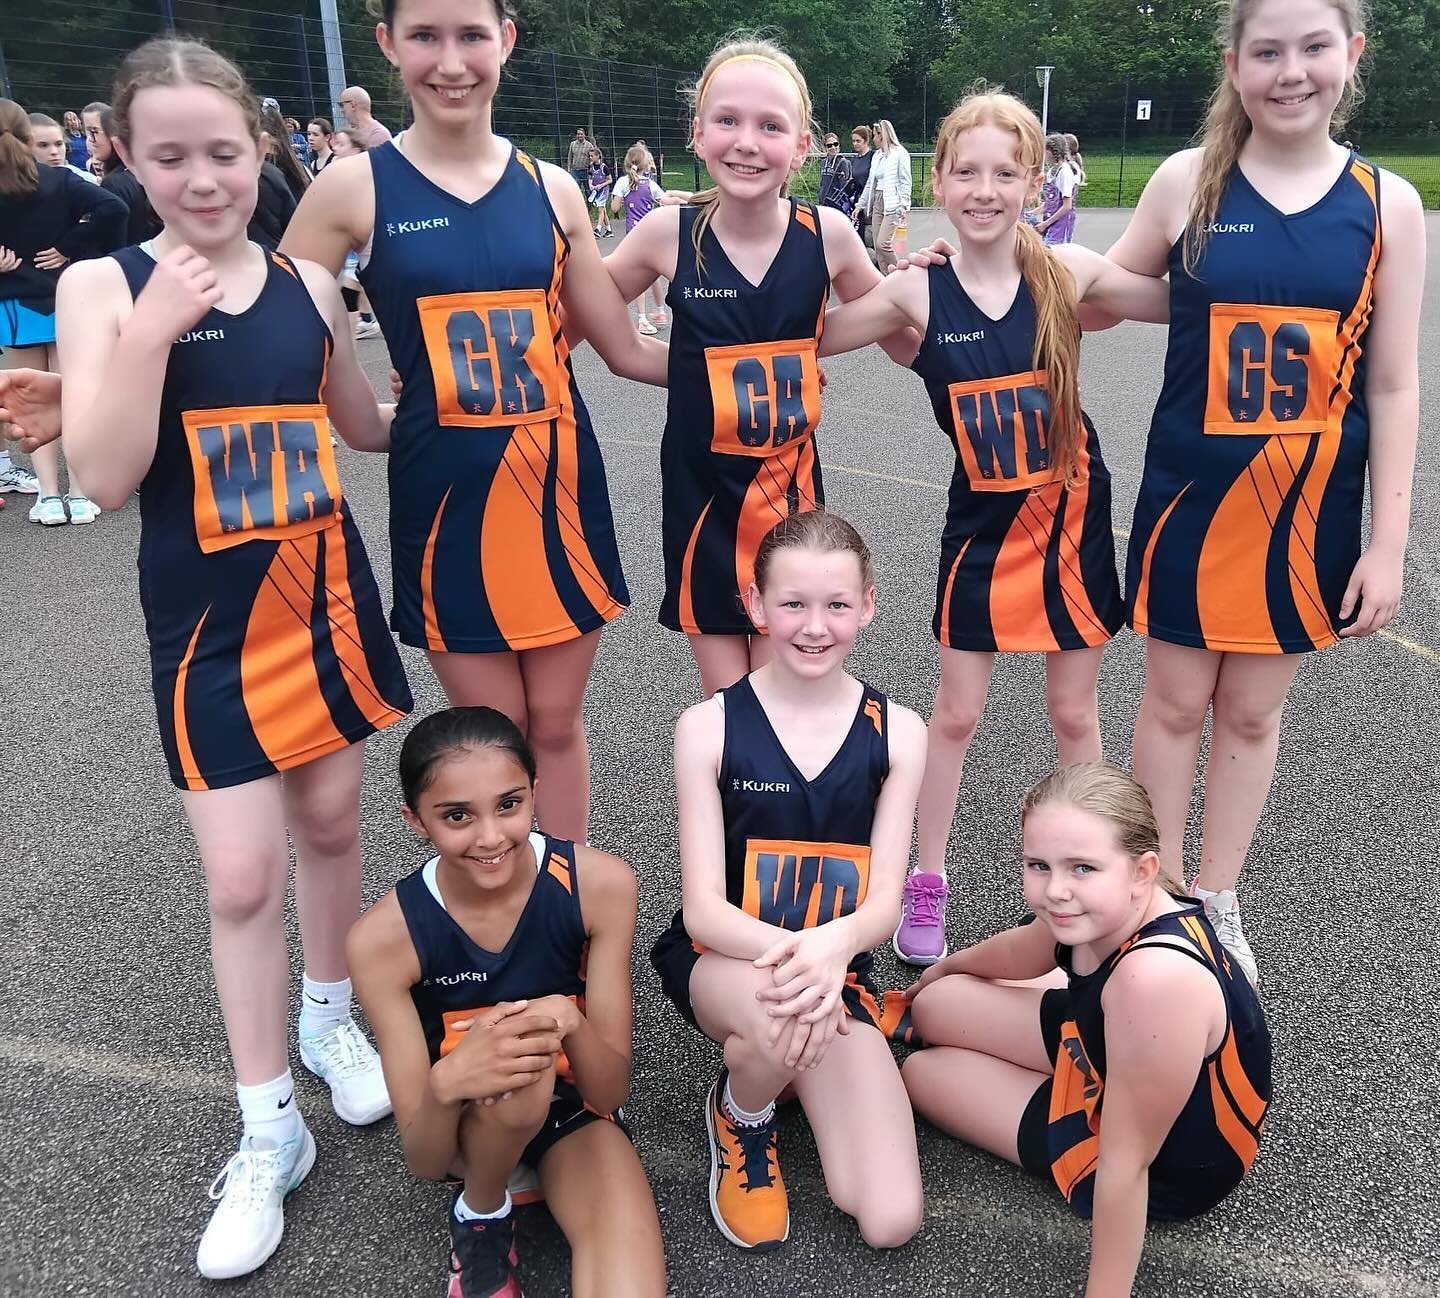 Well done to the U11s winning their game against Dynamos 18-13 tonight. The girls started slowly with a two goal deficit at quarter time but they brought it back to a draw by half time. The third quarter was a tough one and we went into the final str